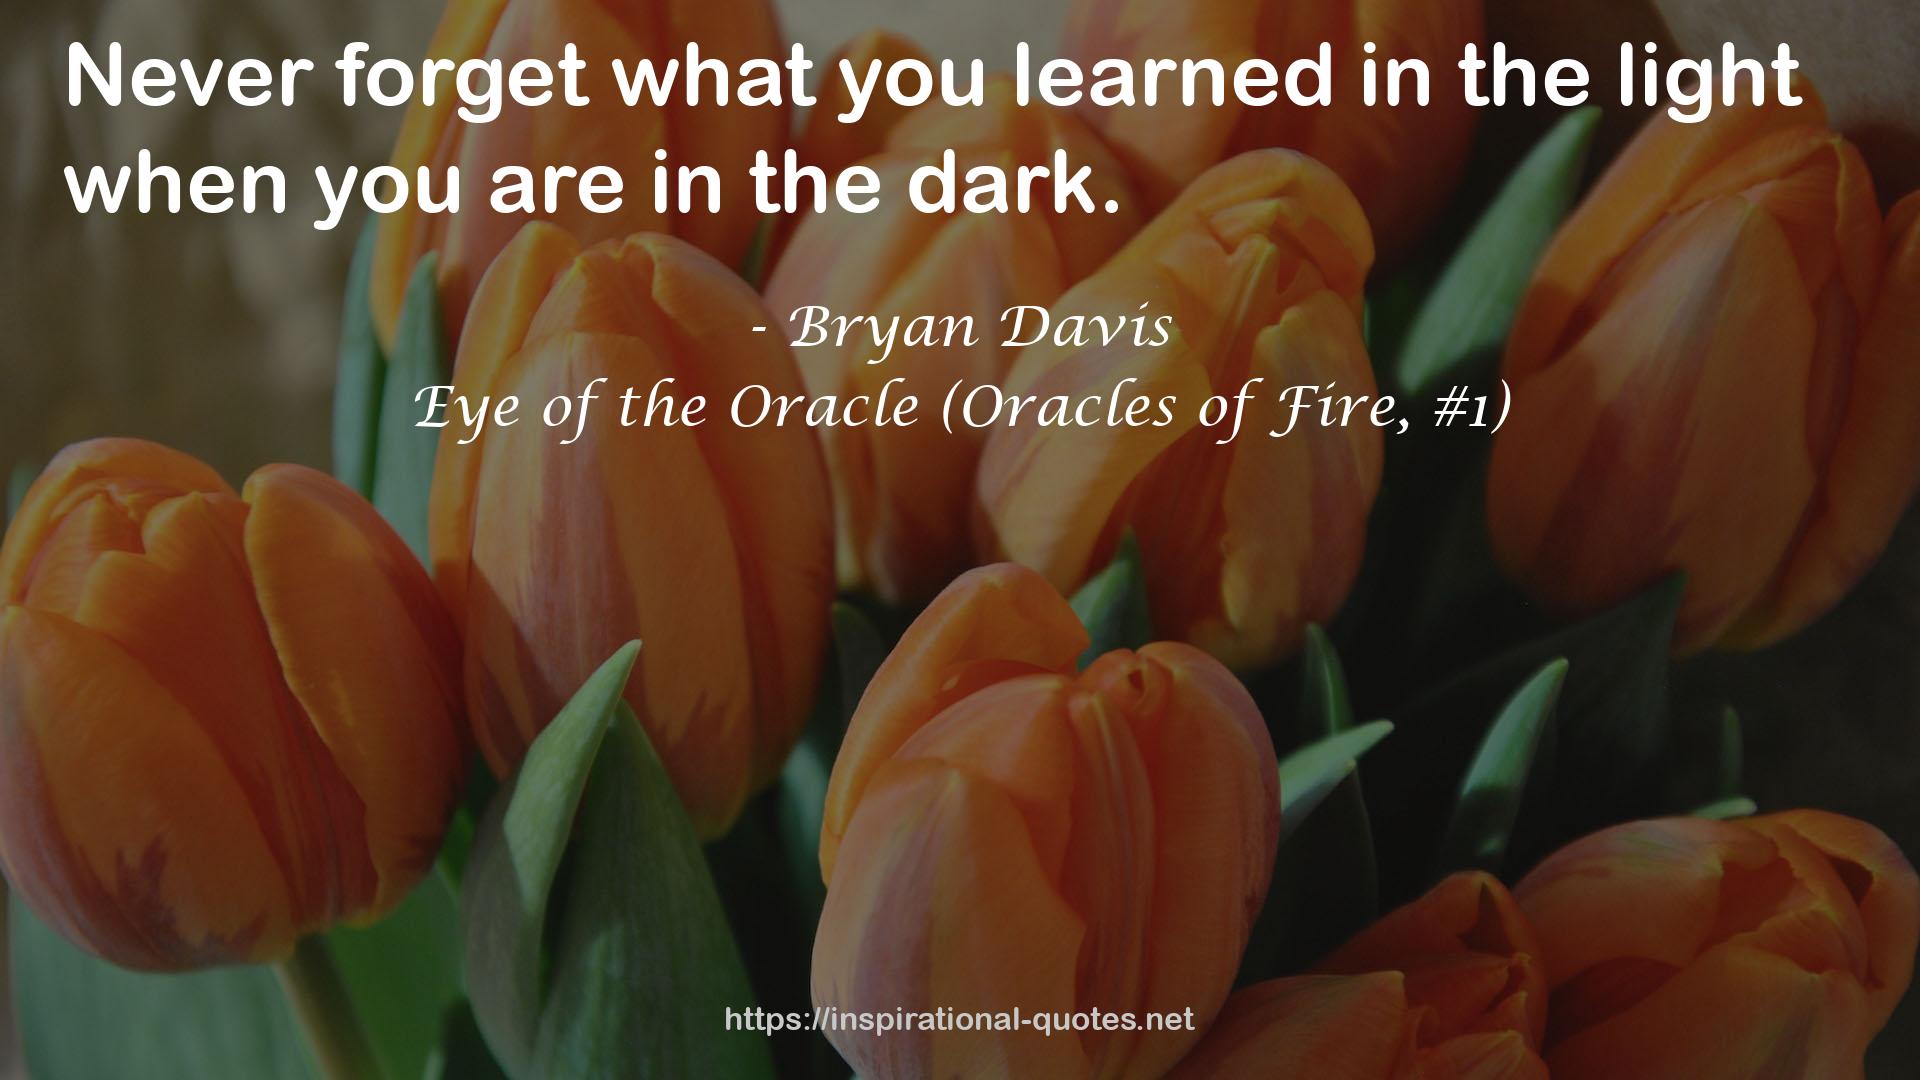 Eye of the Oracle (Oracles of Fire, #1) QUOTES